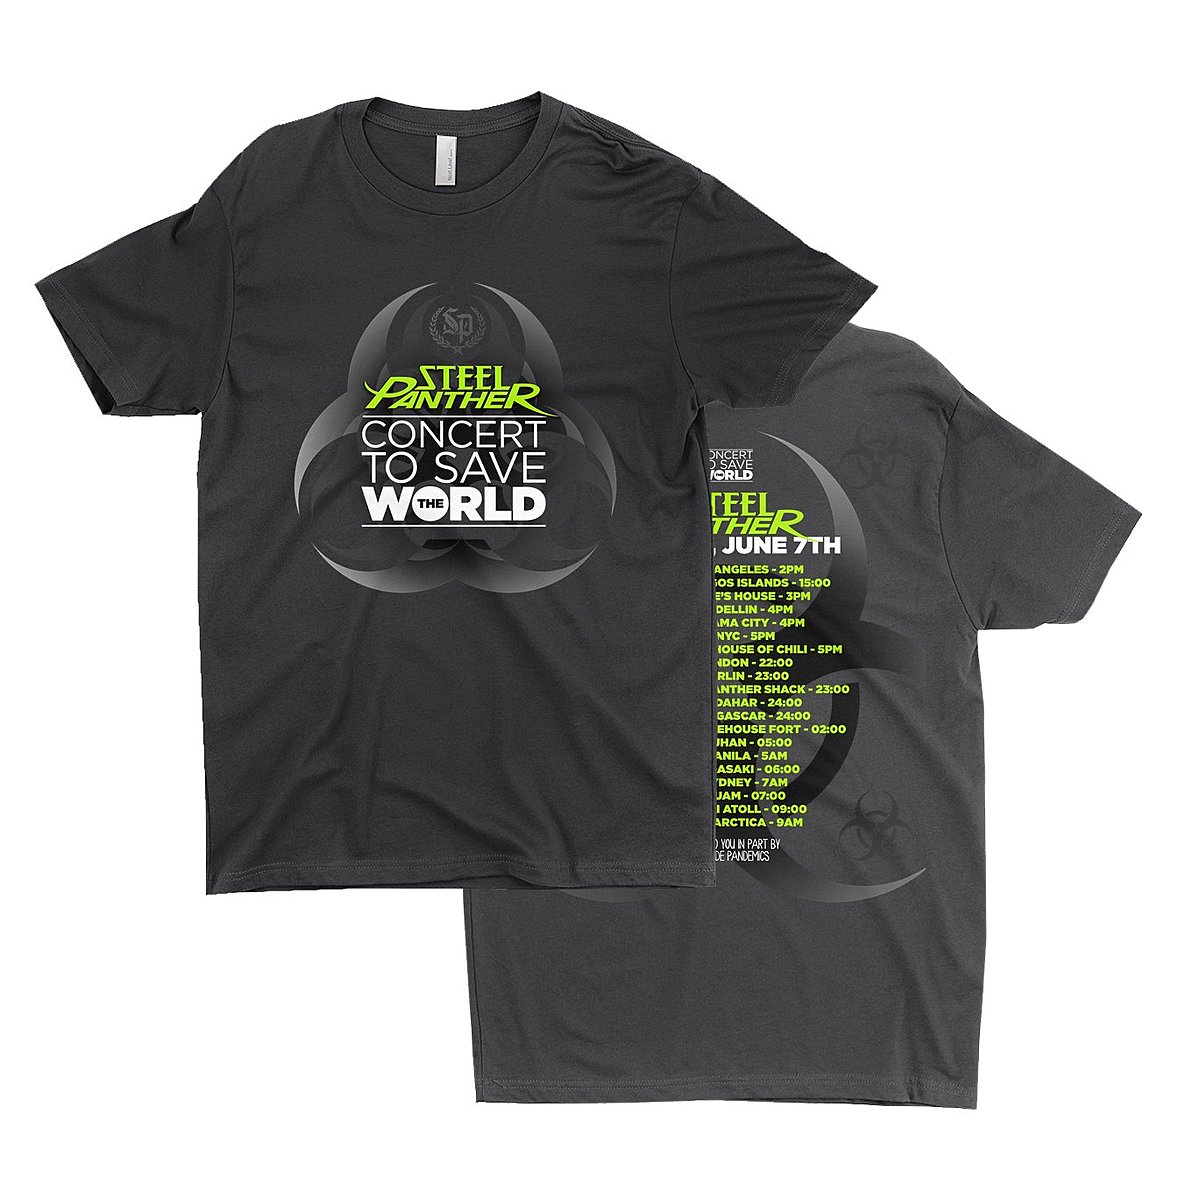 The Concert To Save The World Shirt